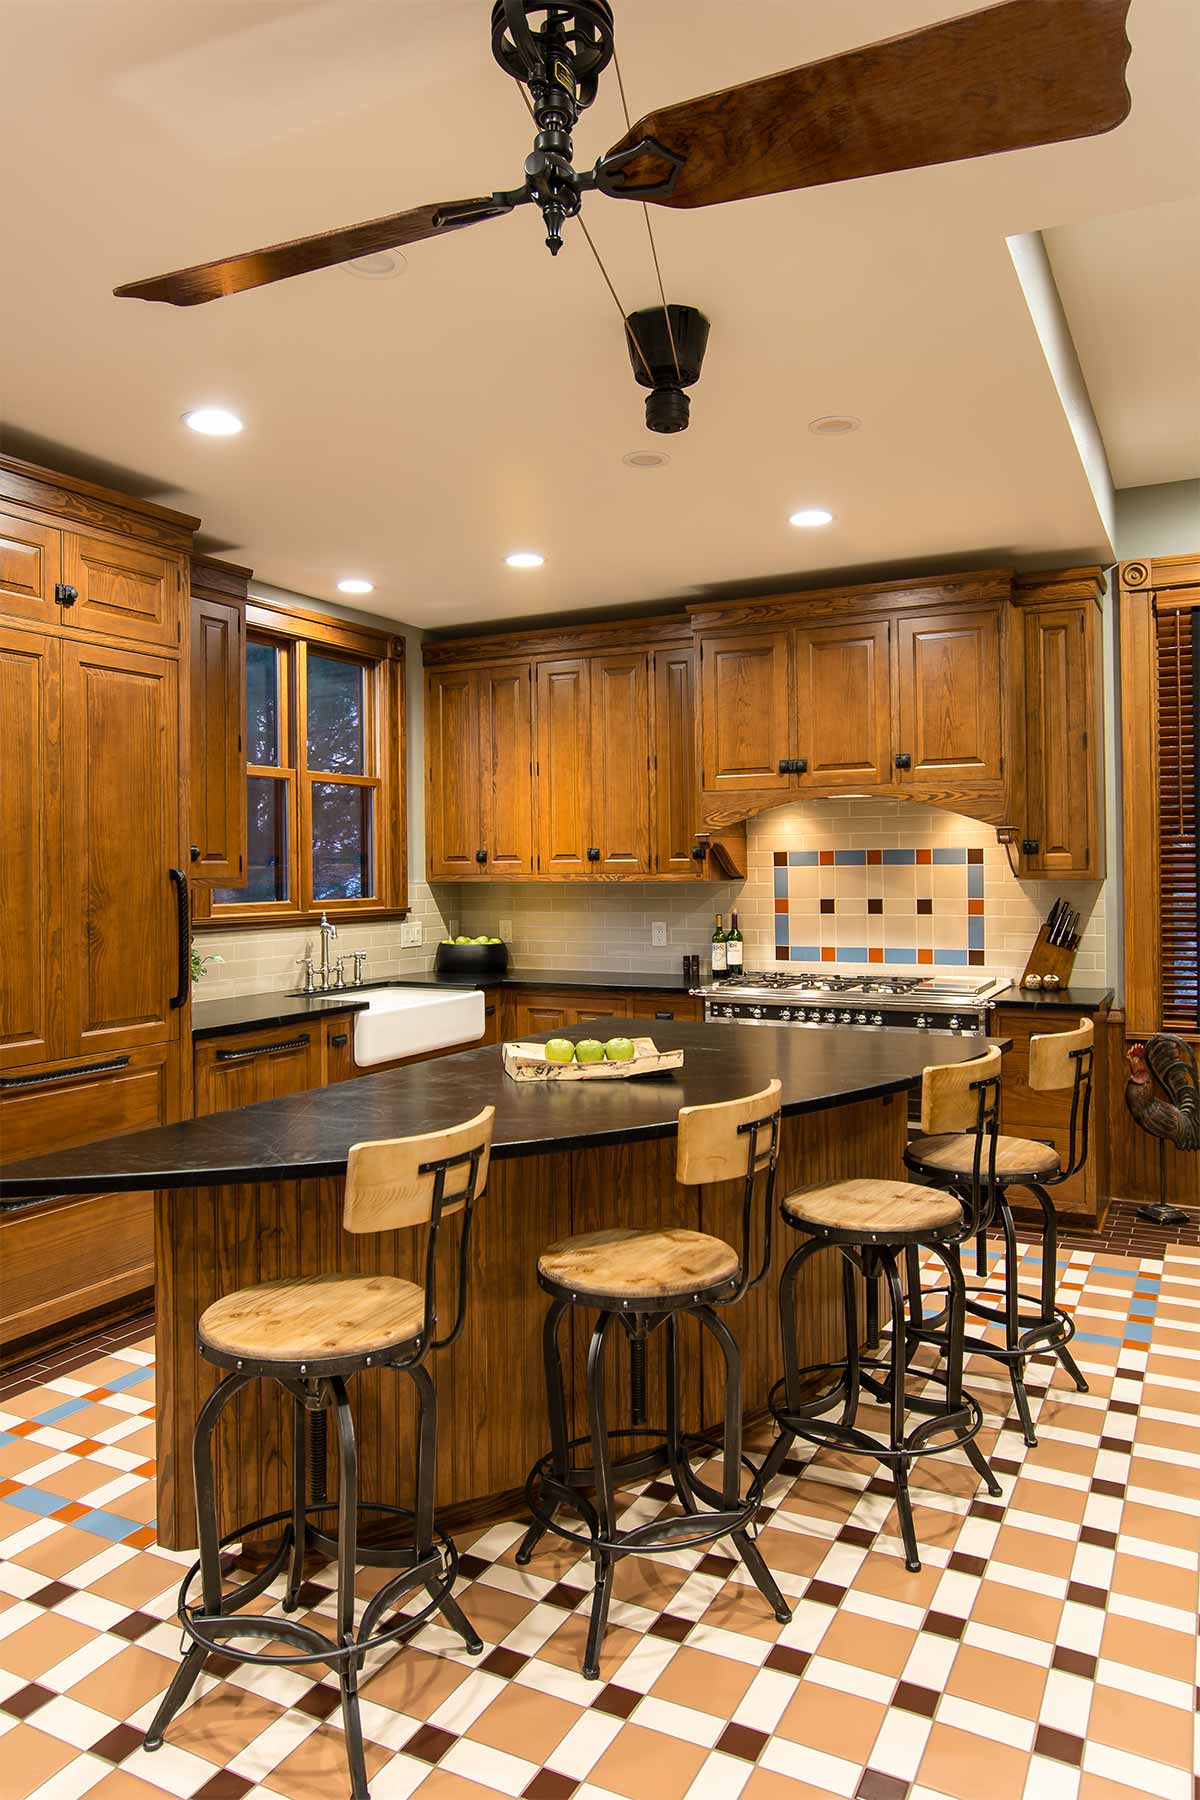 historical kitchen remodel by Silent Rivers in Des Moines Victorian home features custom cabinets concealing refrigerator and dishwasher and belt-driven fan